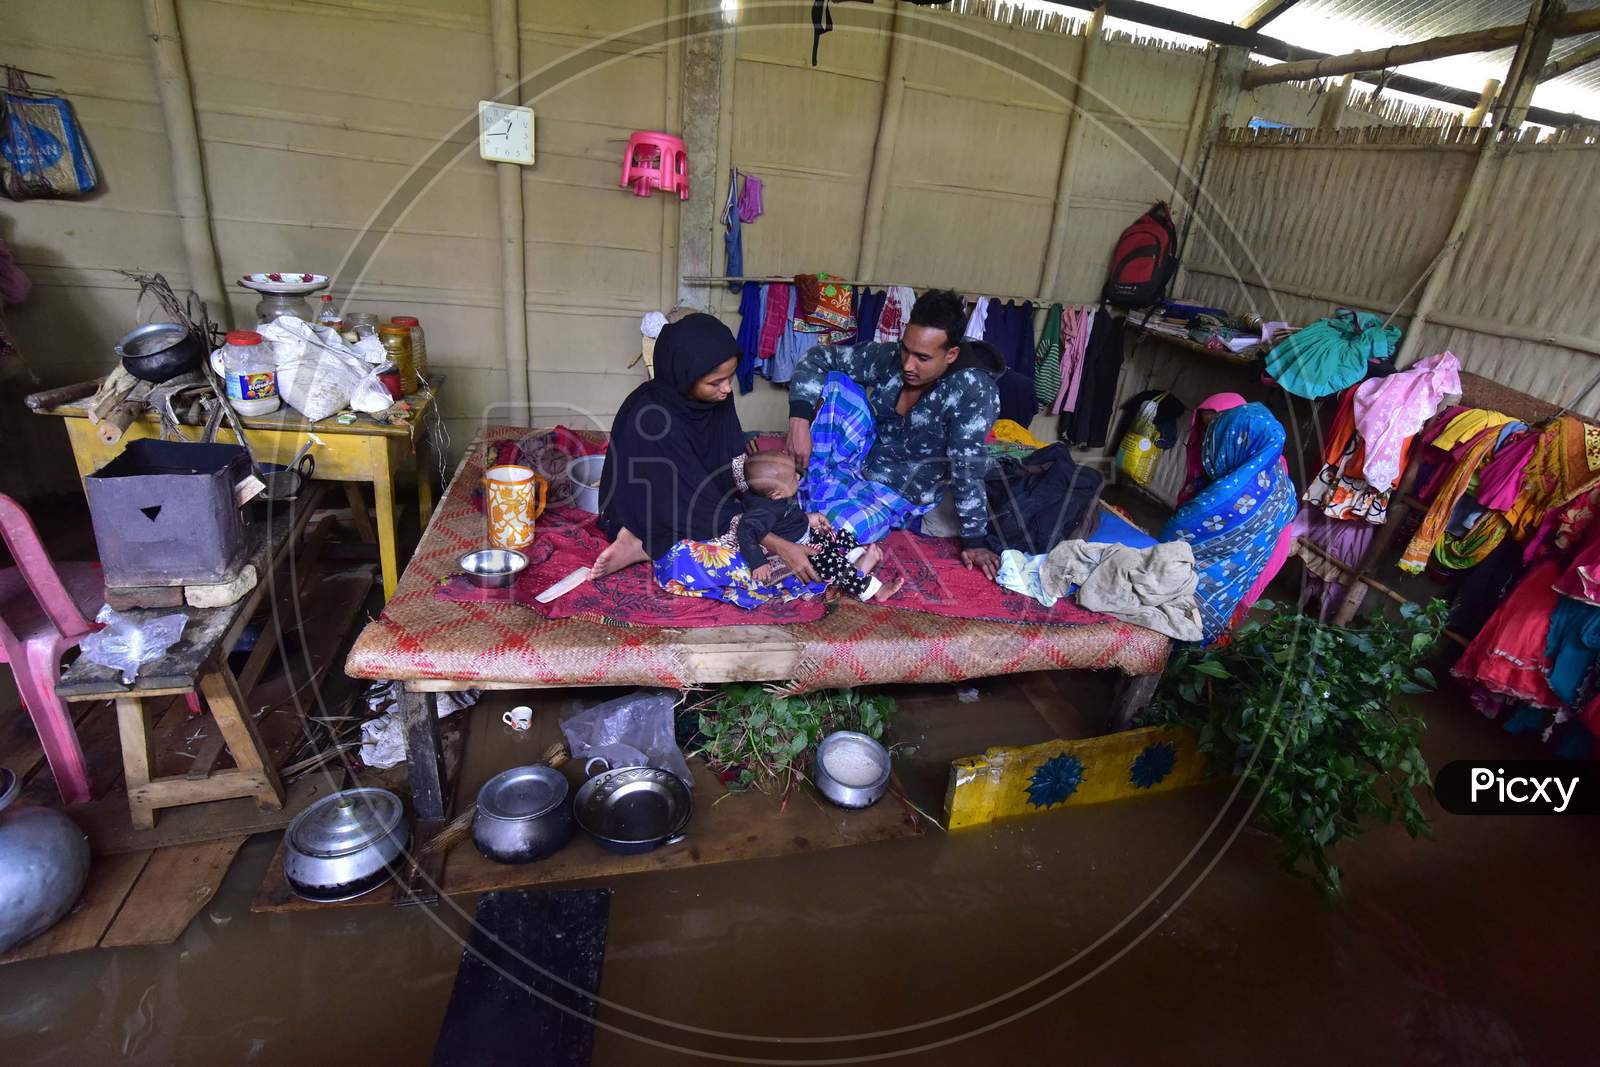 A Family Takes Shelter On A Bed Inside their Submerged House At At Flood Affected Bakulguri Village Near Kampur In Nagaon District Of Assam On May 27, 2020.